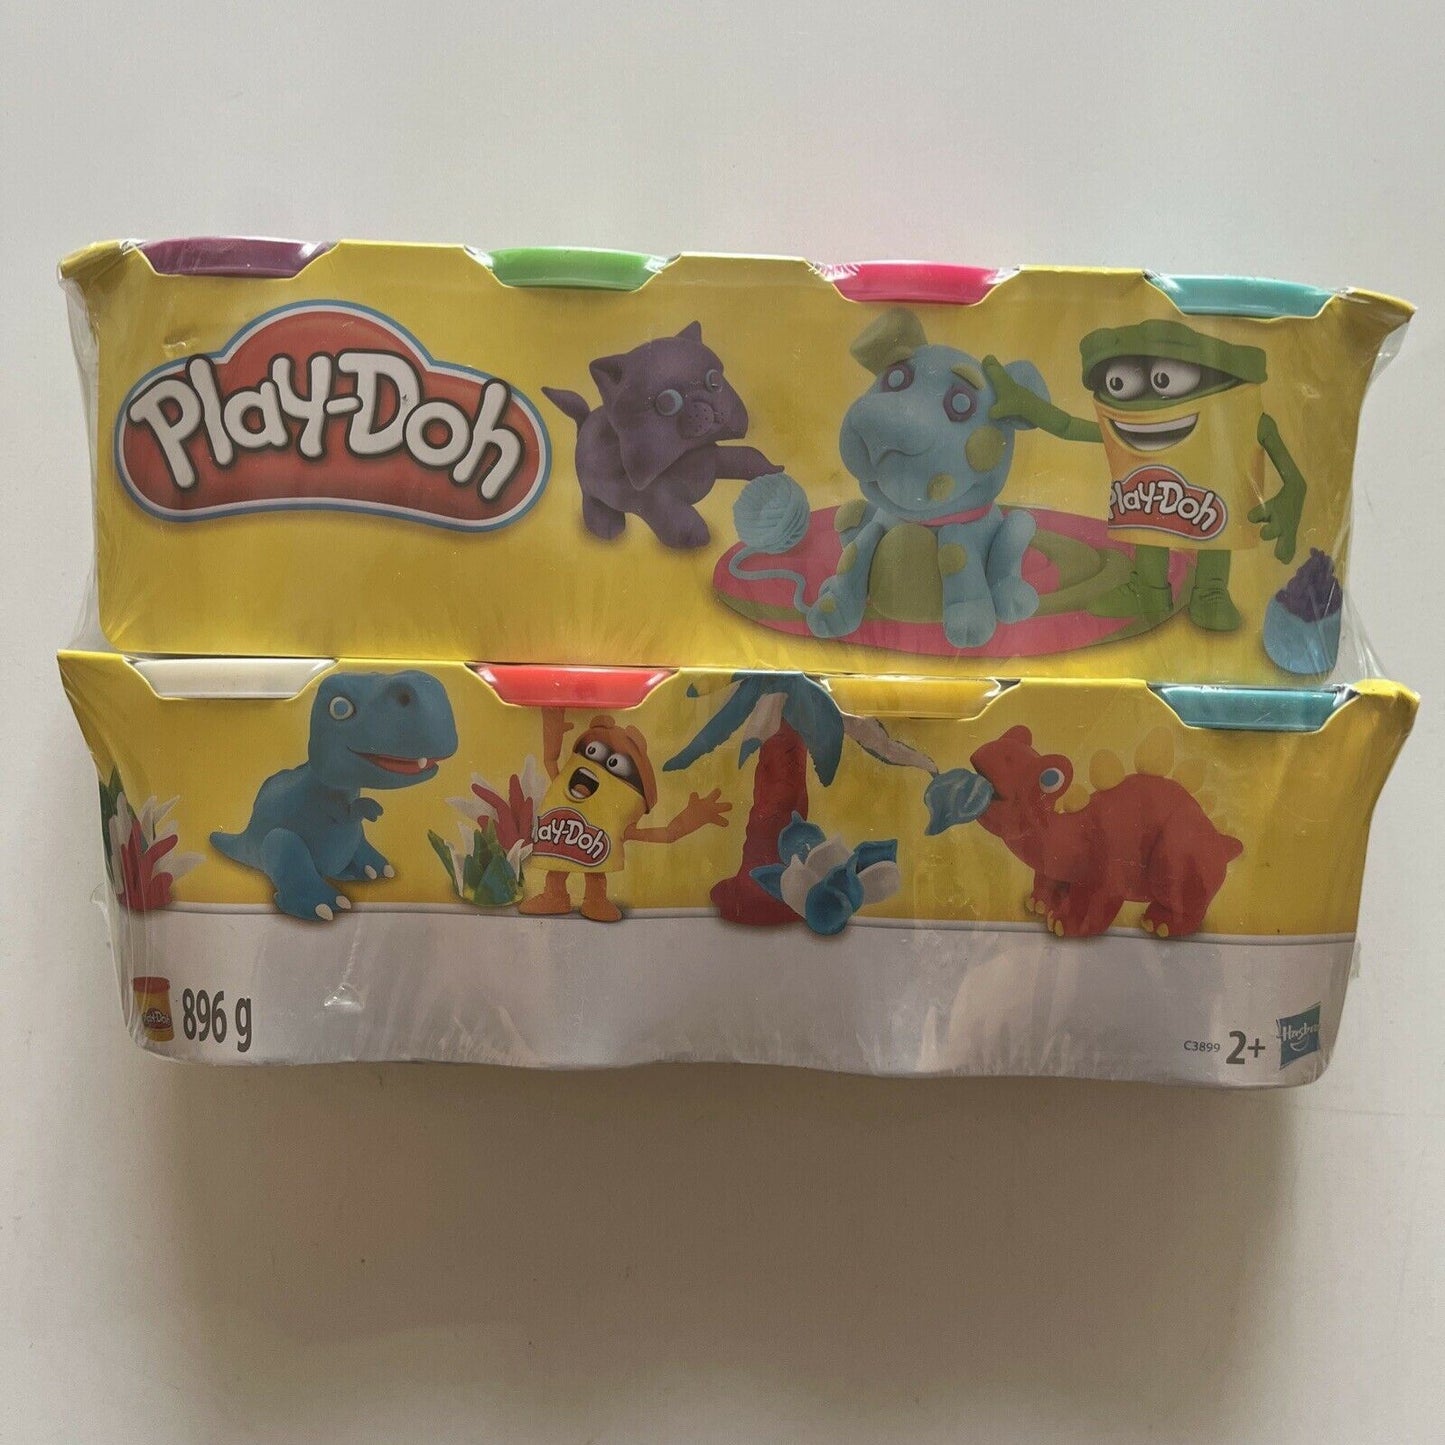 *New Sealed* Play-Doh Tub 8 Pack